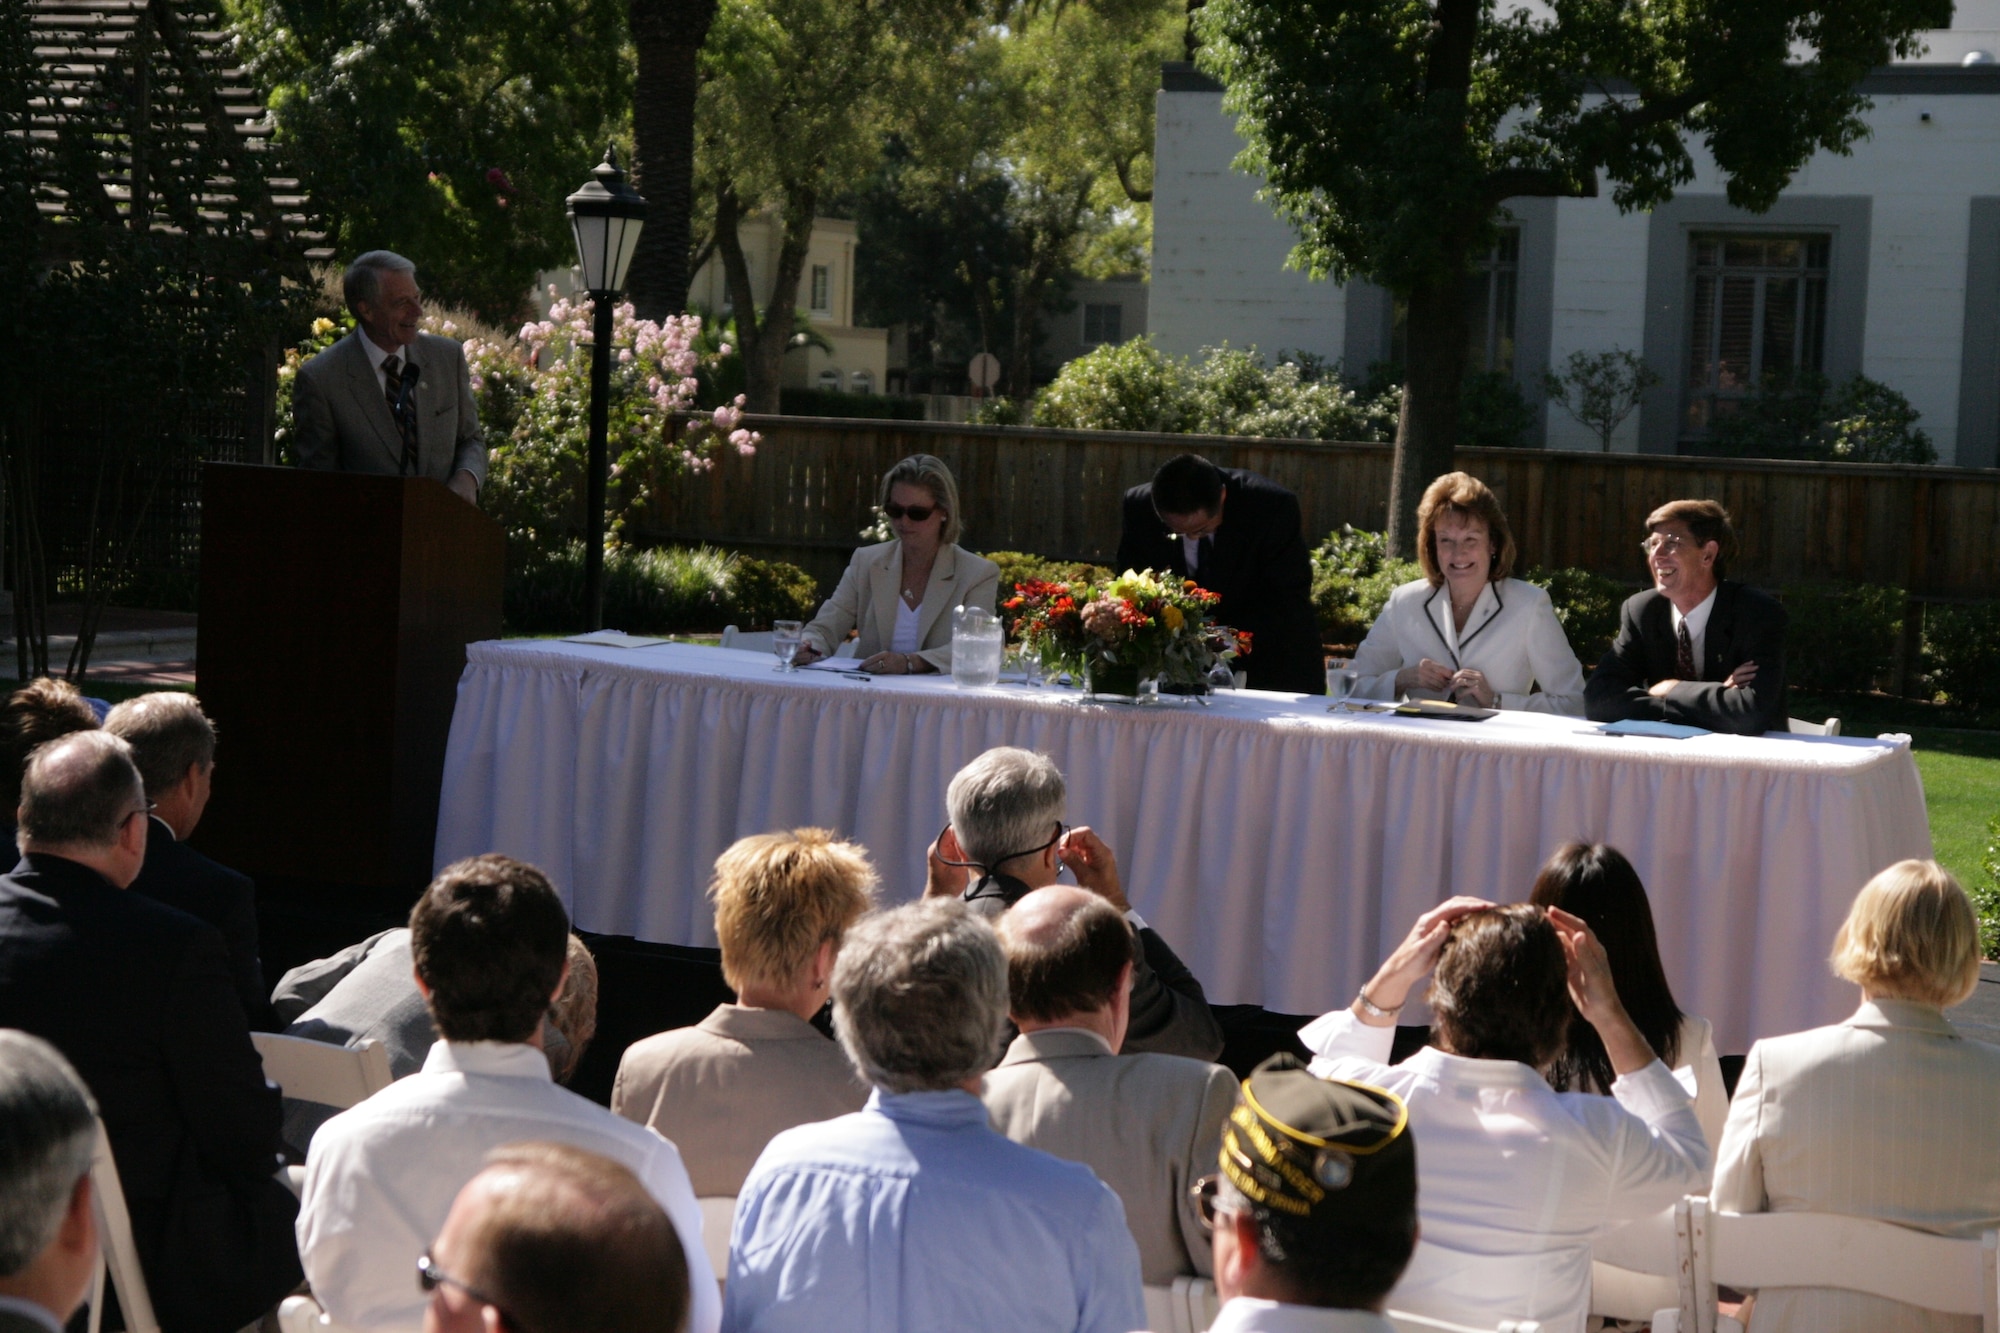 Sacramento County and the U.S. Air Force signed a monumental agreement allowing for rapid cleanup and early land transfer at McClellan in 2007. This was a first in the nation for the Department of Defense, transferring contaminated land, money and authority to perform cleanup at a National Priority List site. At the event, distinguished guests included top officials from the U.S. Air Force, environmental regulatory agencies, local elected officials, McClellan Park and Sacramento County. (Courtesy photo)